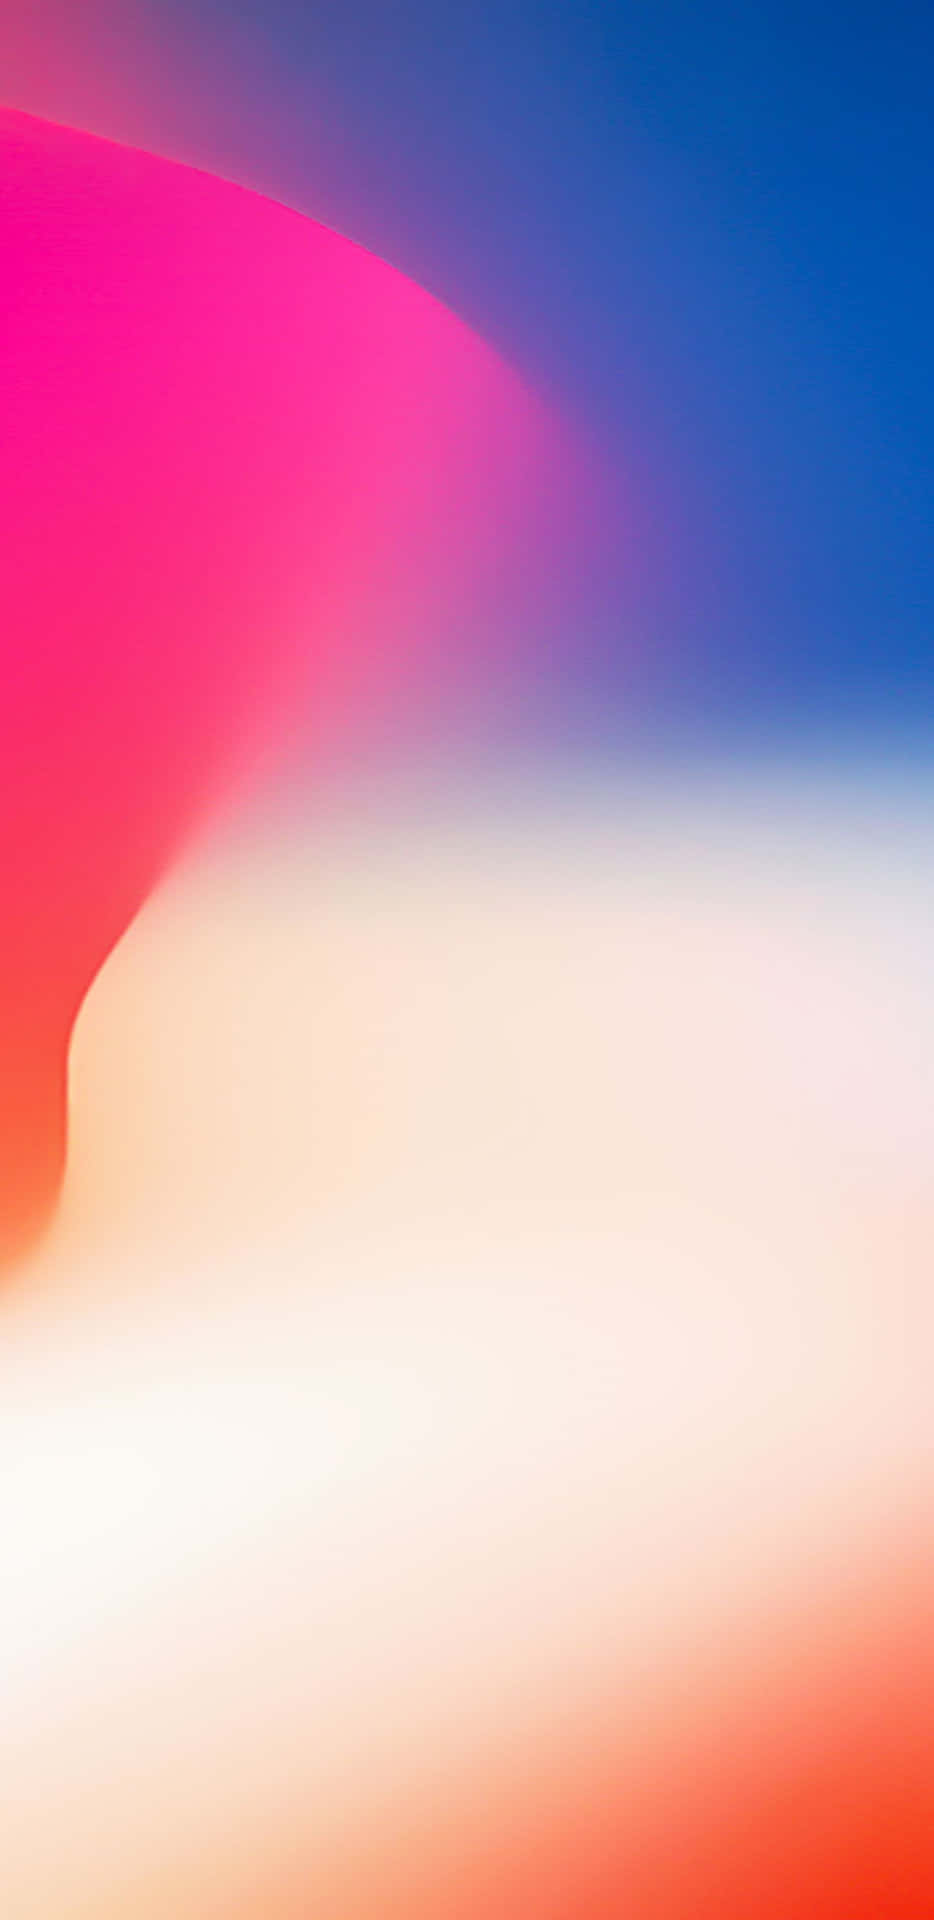 An Abstract Image Of A Pink And Blue Background Wallpaper